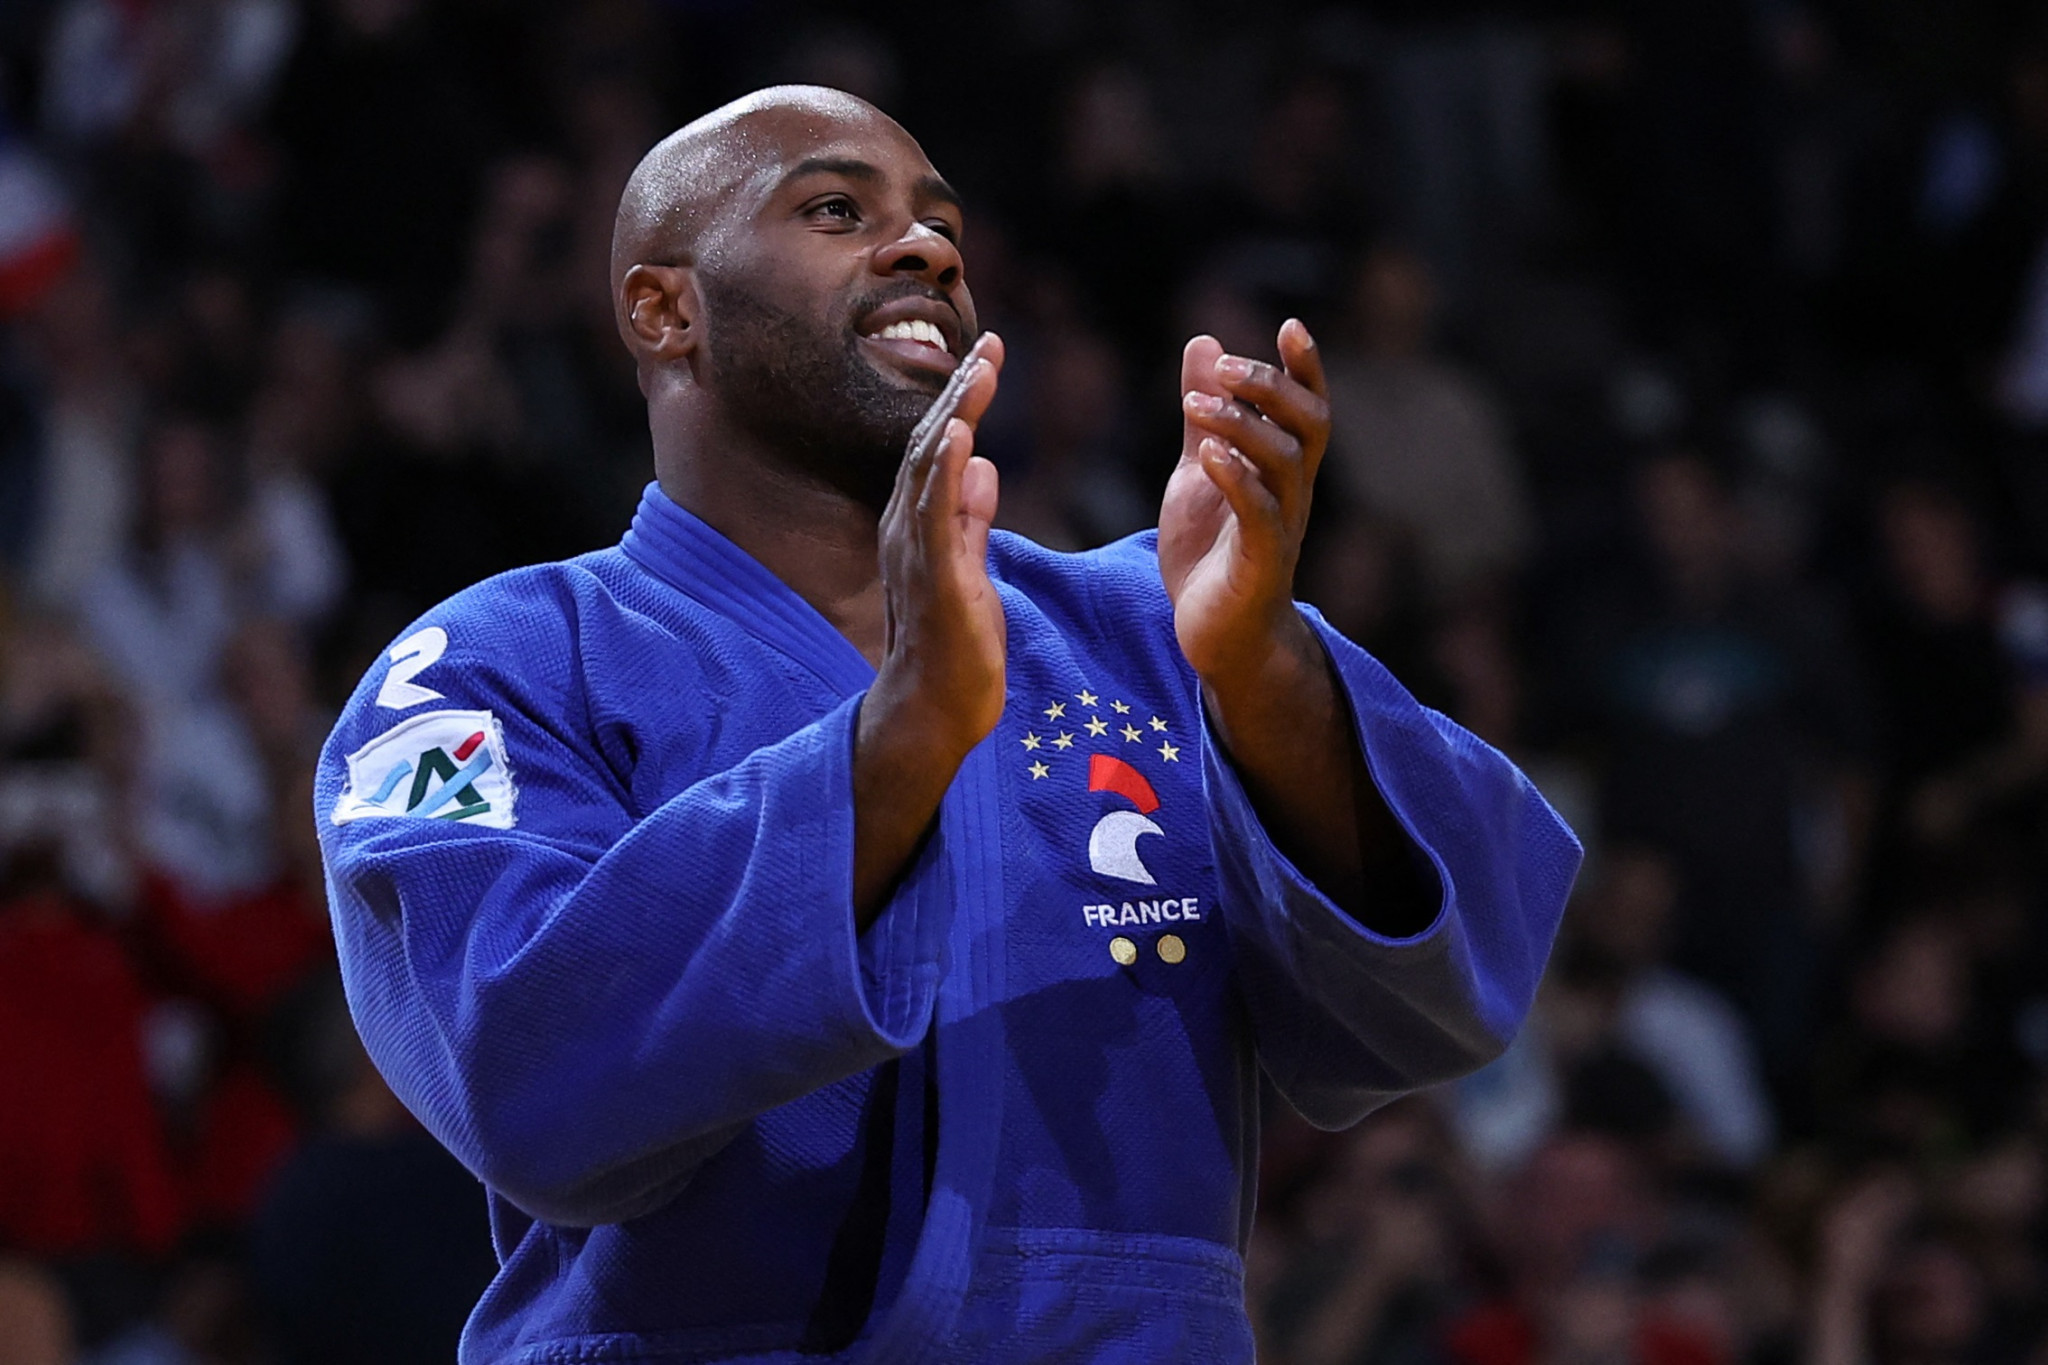 Riner poised to make World Judo Championships comeback in Doha with eye on Paris 2024